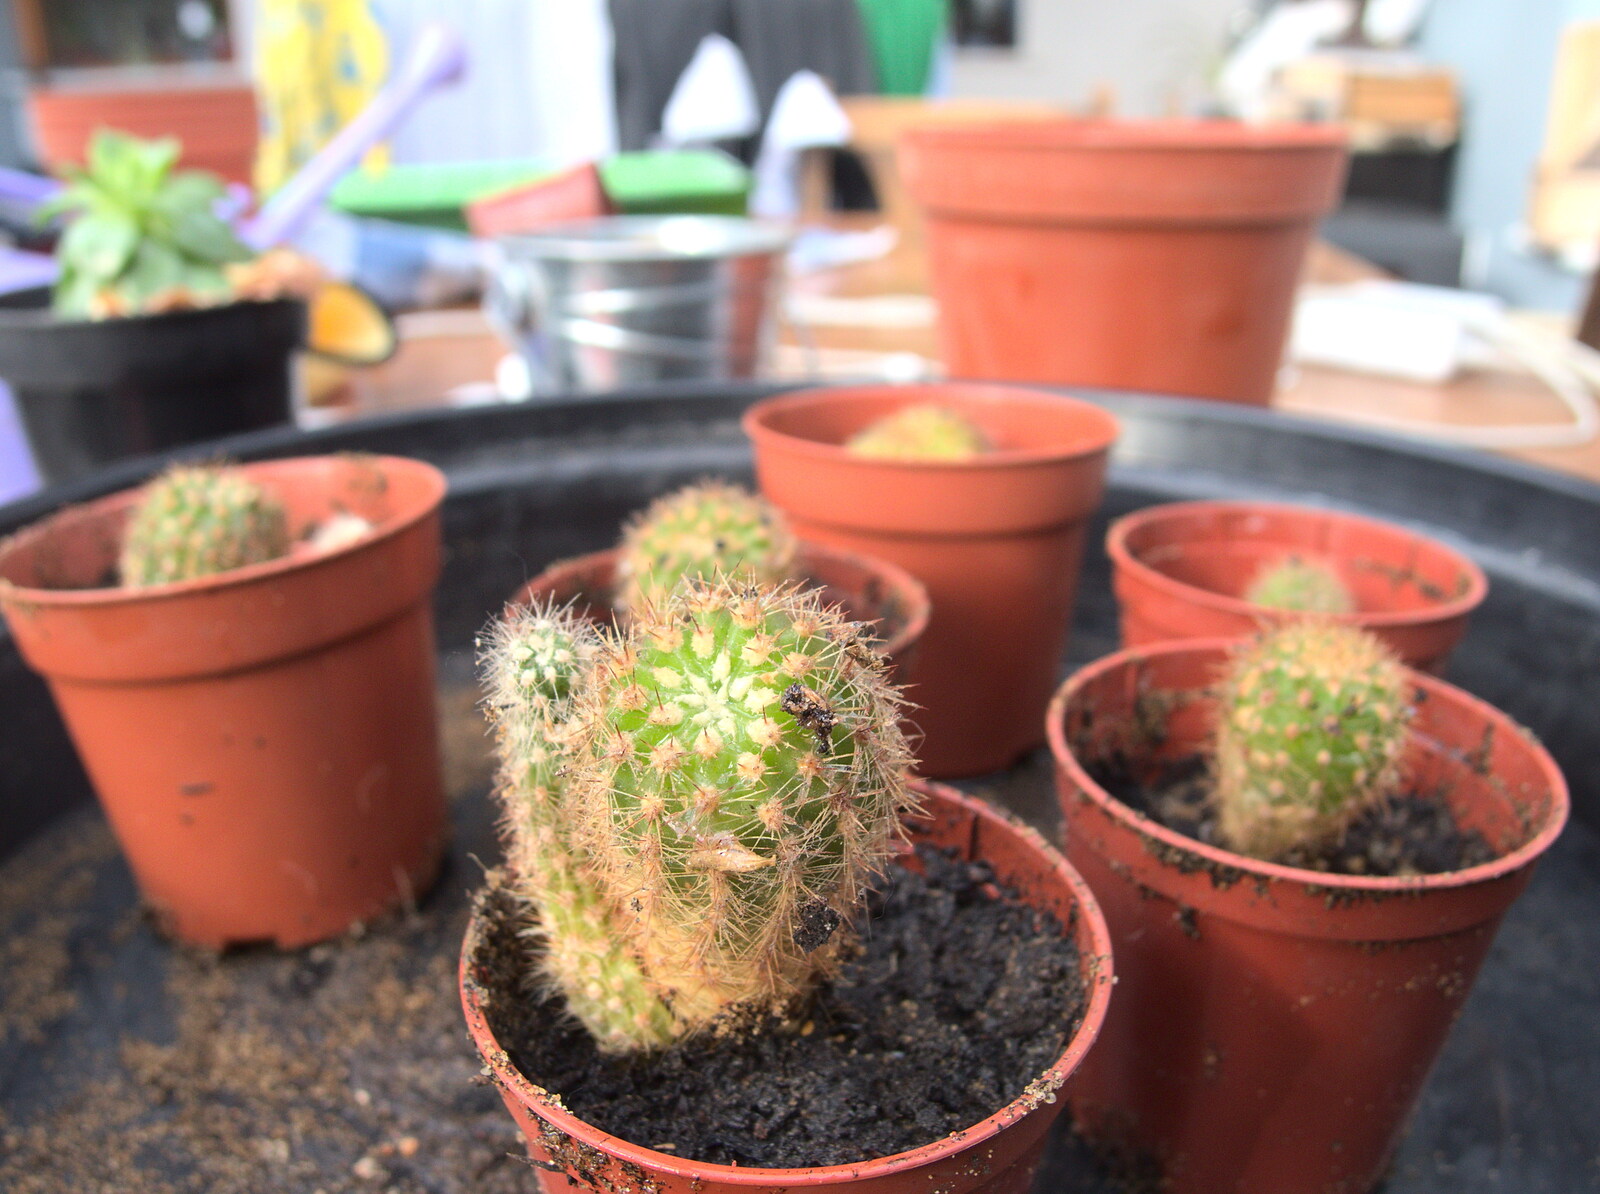 February Cactus Randomness, London and Brome, Suffolk - 14th February 2016: New cacti in pots